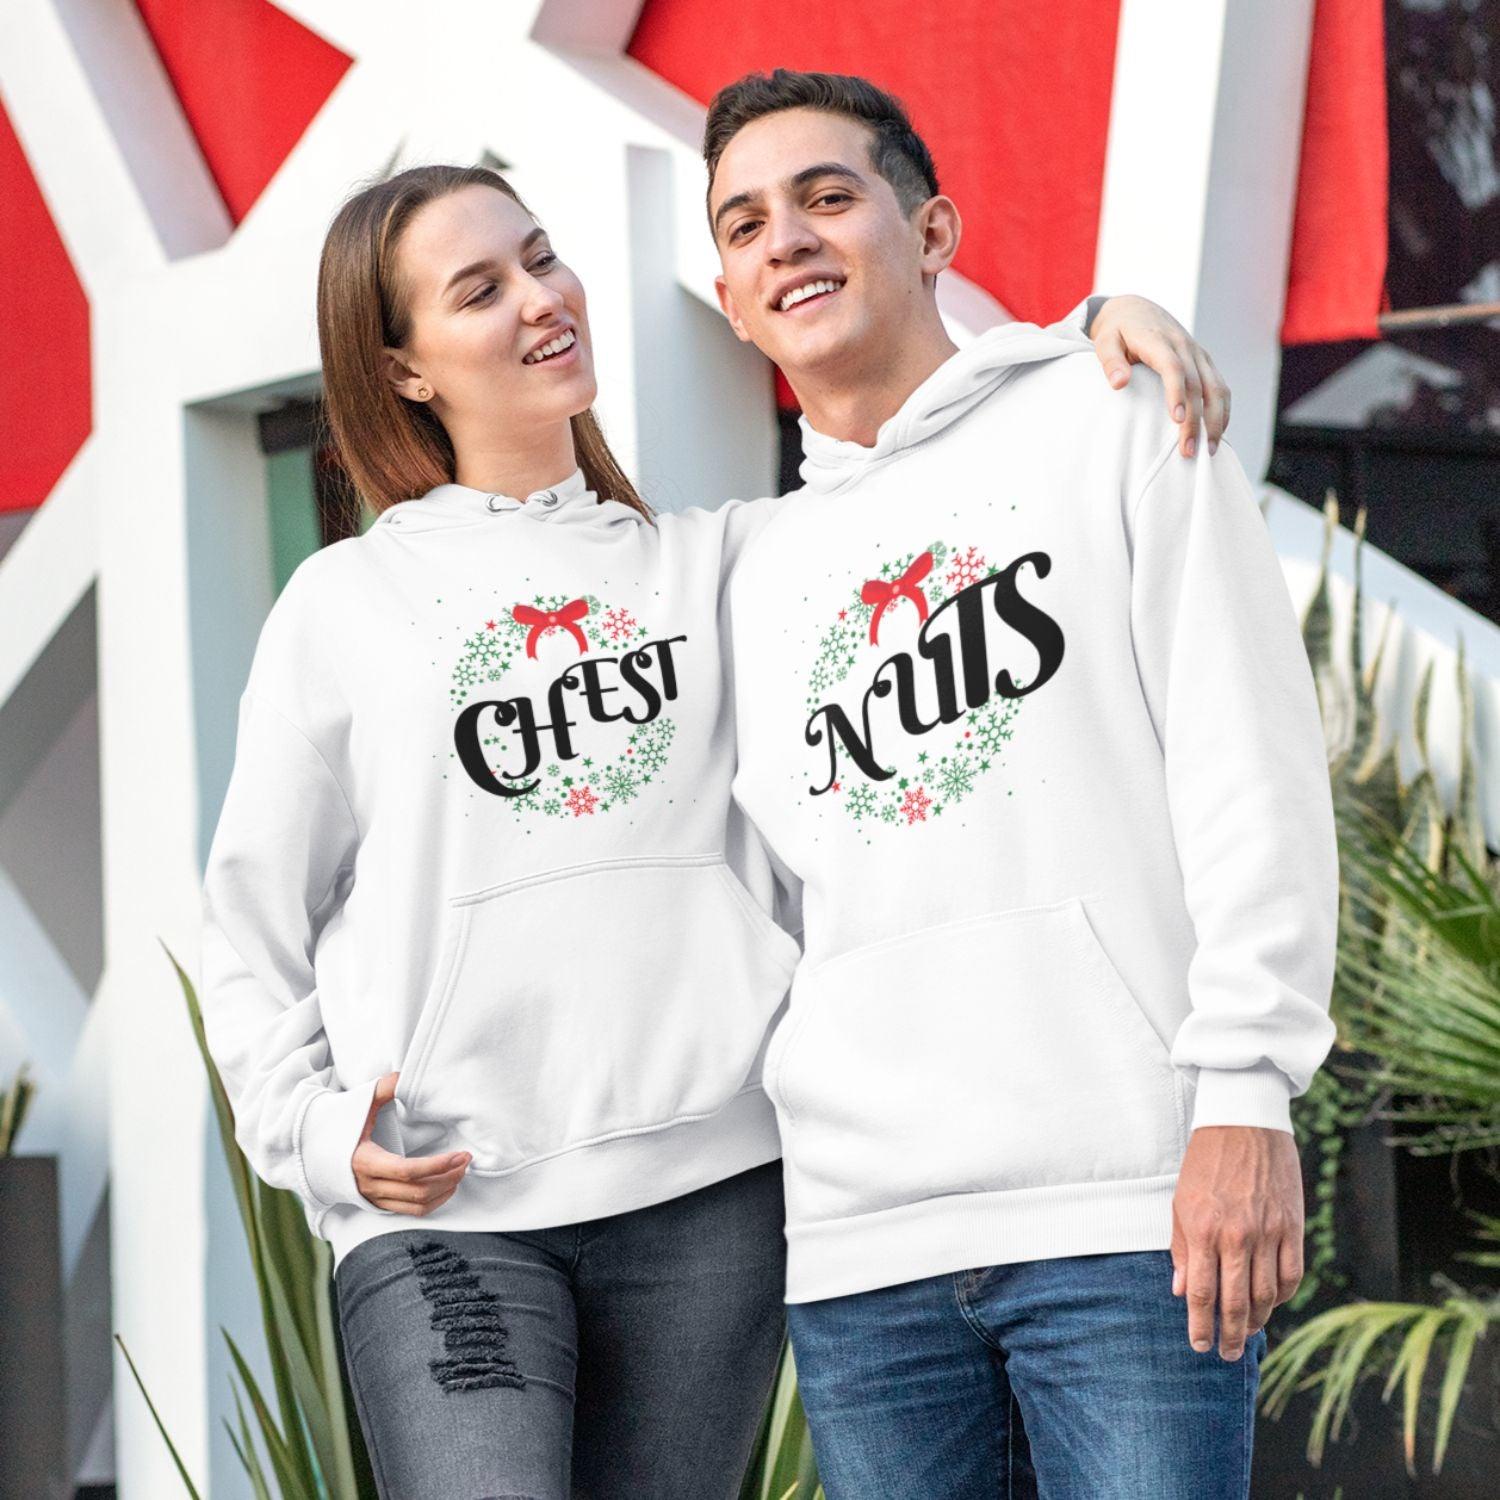 Matching Christmas Outfits: Chest and Nuts Couples Funny Outfits - 4Lovebirds